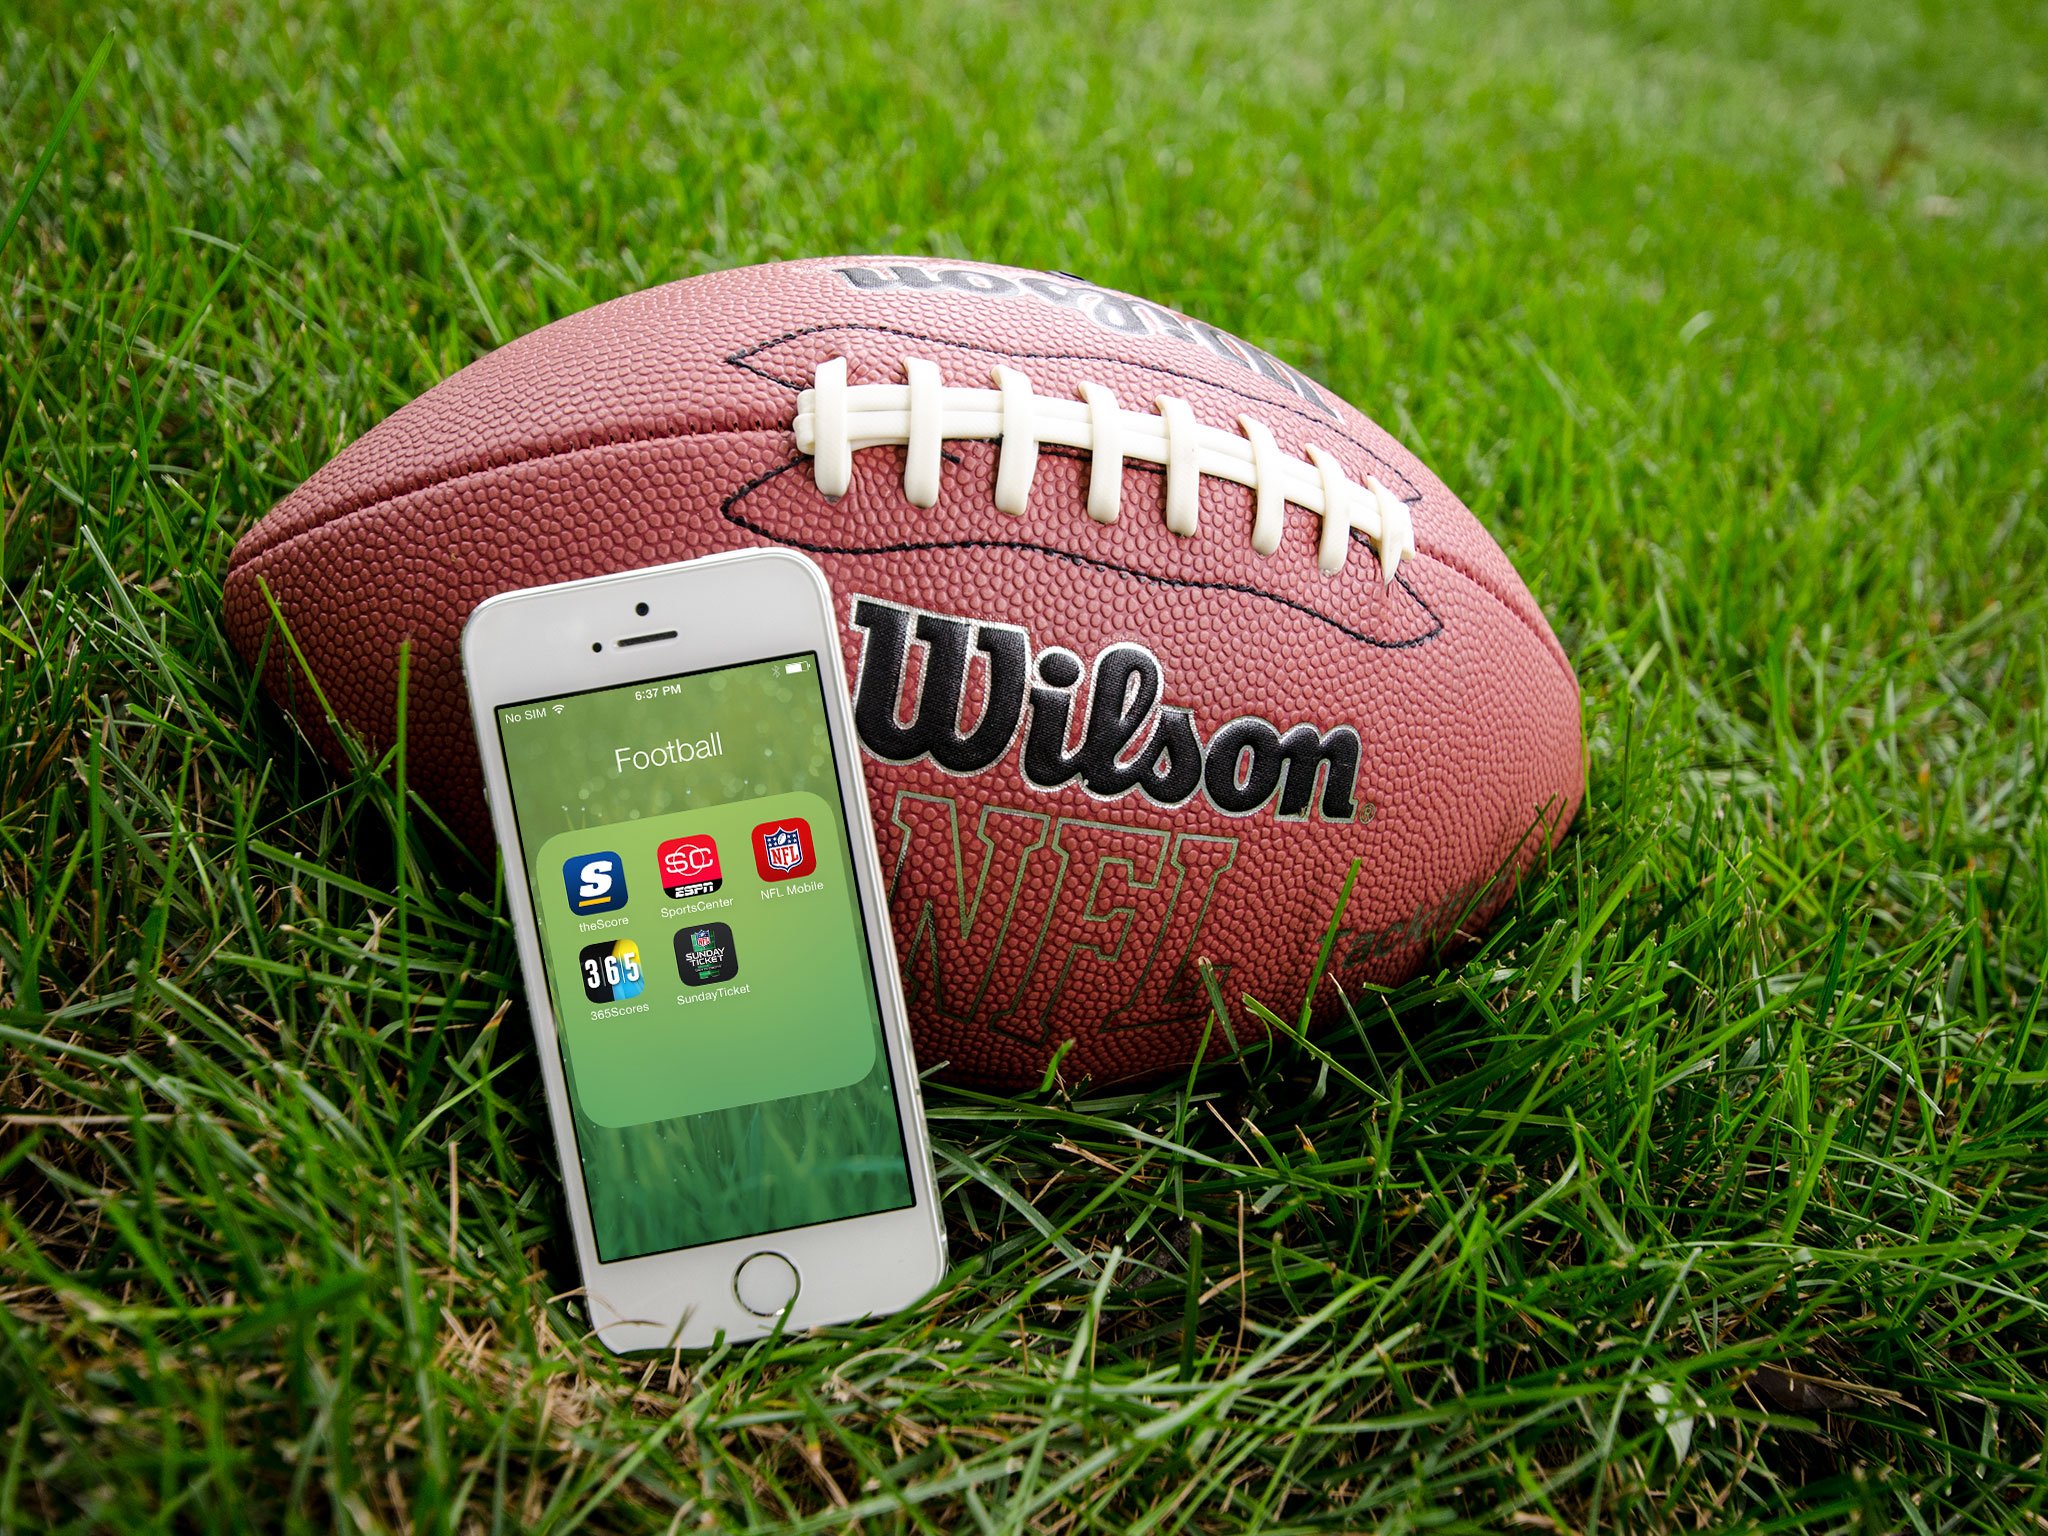 Best NFL apps for iPhone: Play by play coverage of your favorite teams!